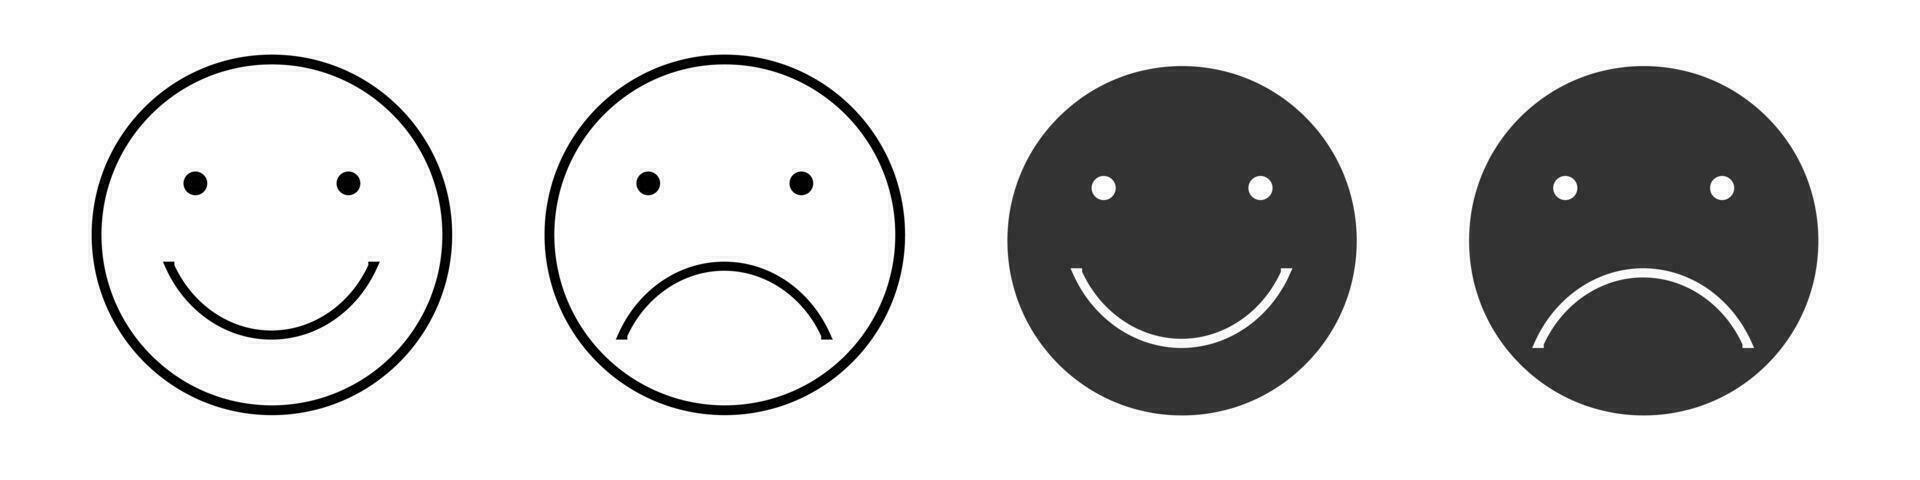 Smile and negativity icon. Emotions symbol. Sign face vector. vector